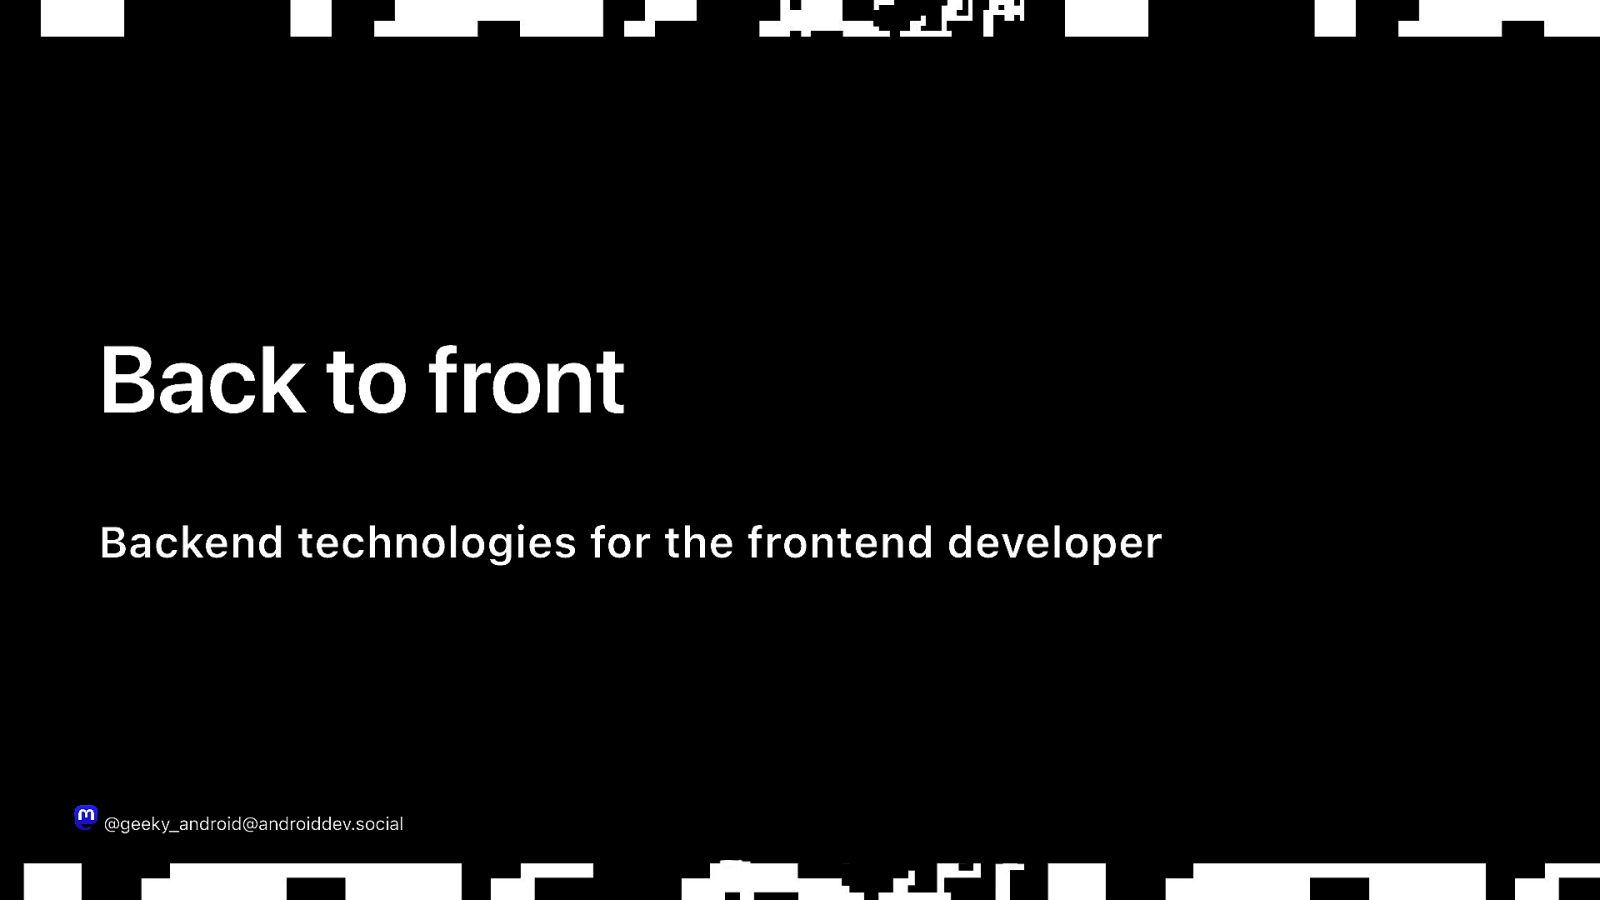 Back to front – Backend technologies for the frontend developer